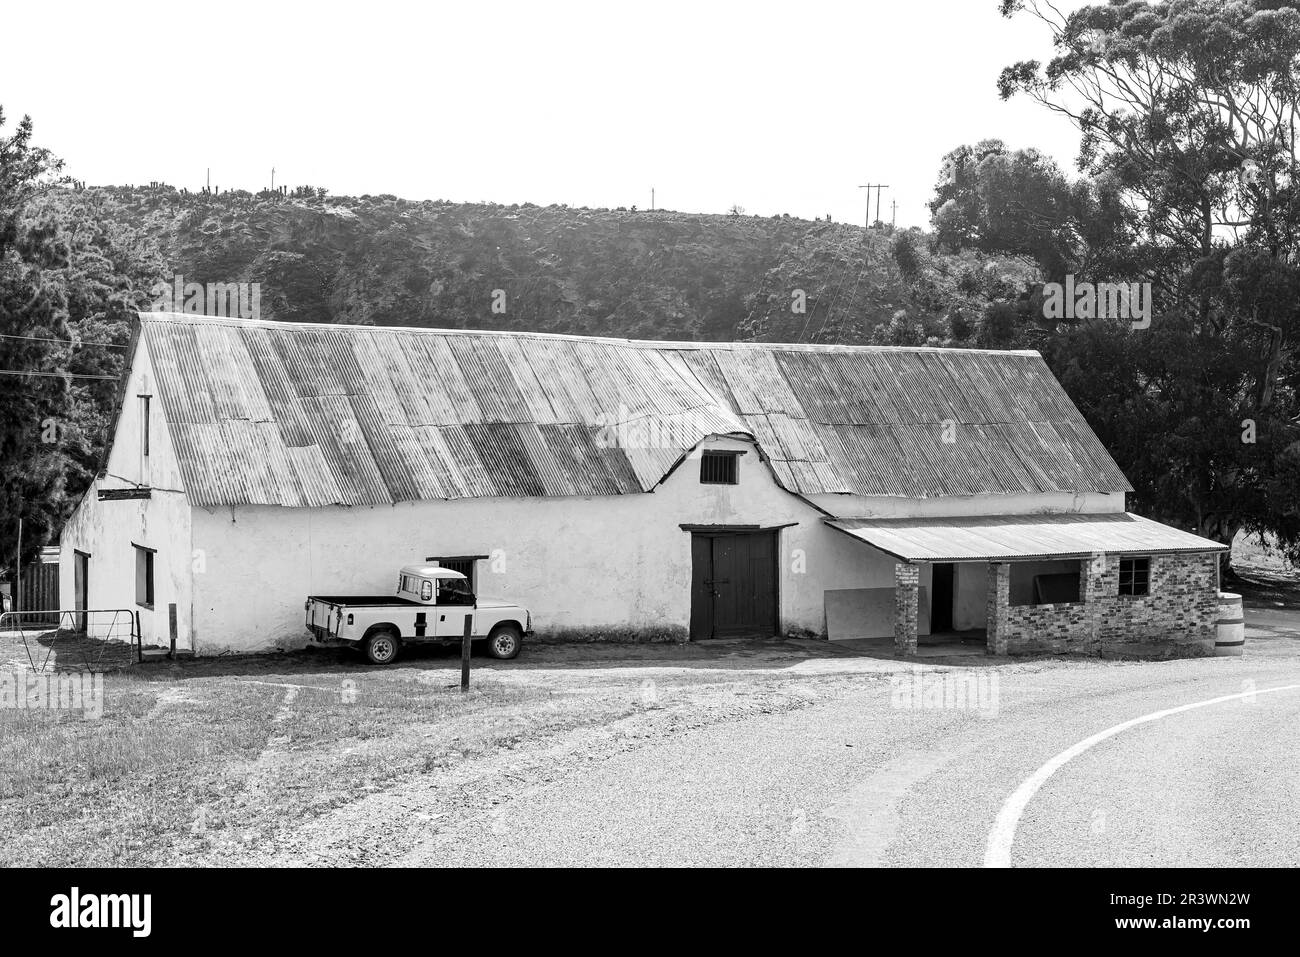 Malagas, South Africa - Sep 24, 2022: An old building in Malagas, a hamlet on the Breede River in the Western Cape Province. A yellow 4x4 pickup truck Stock Photo